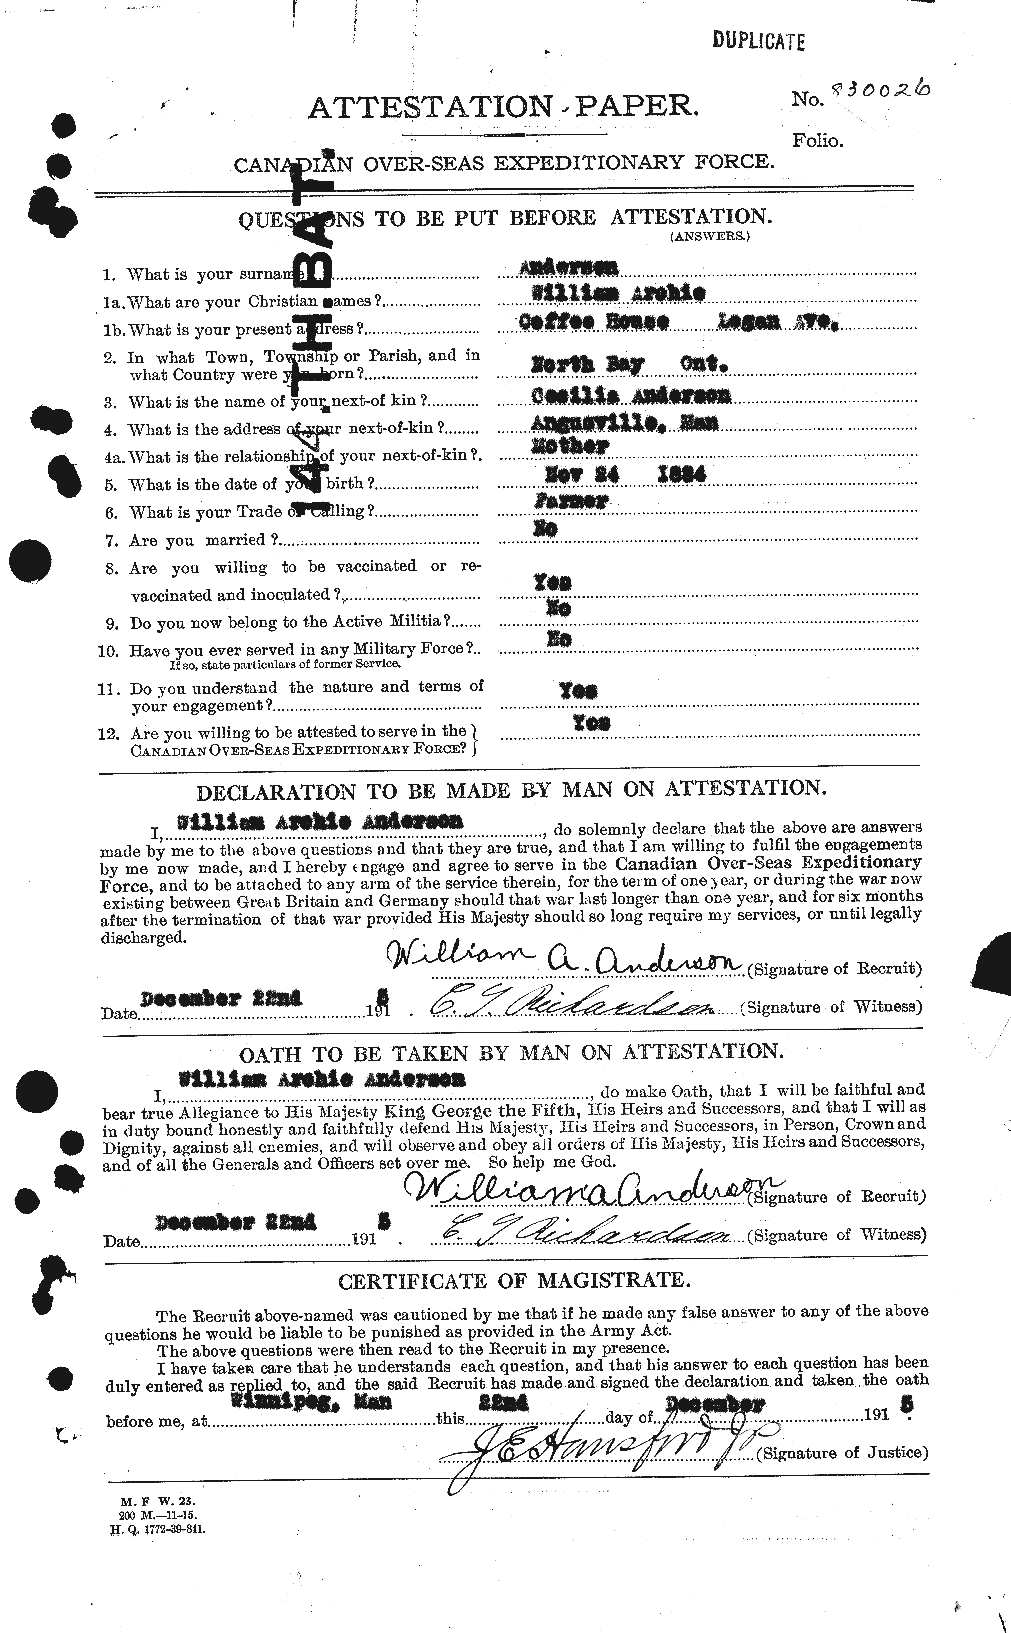 Personnel Records of the First World War - CEF 210776a